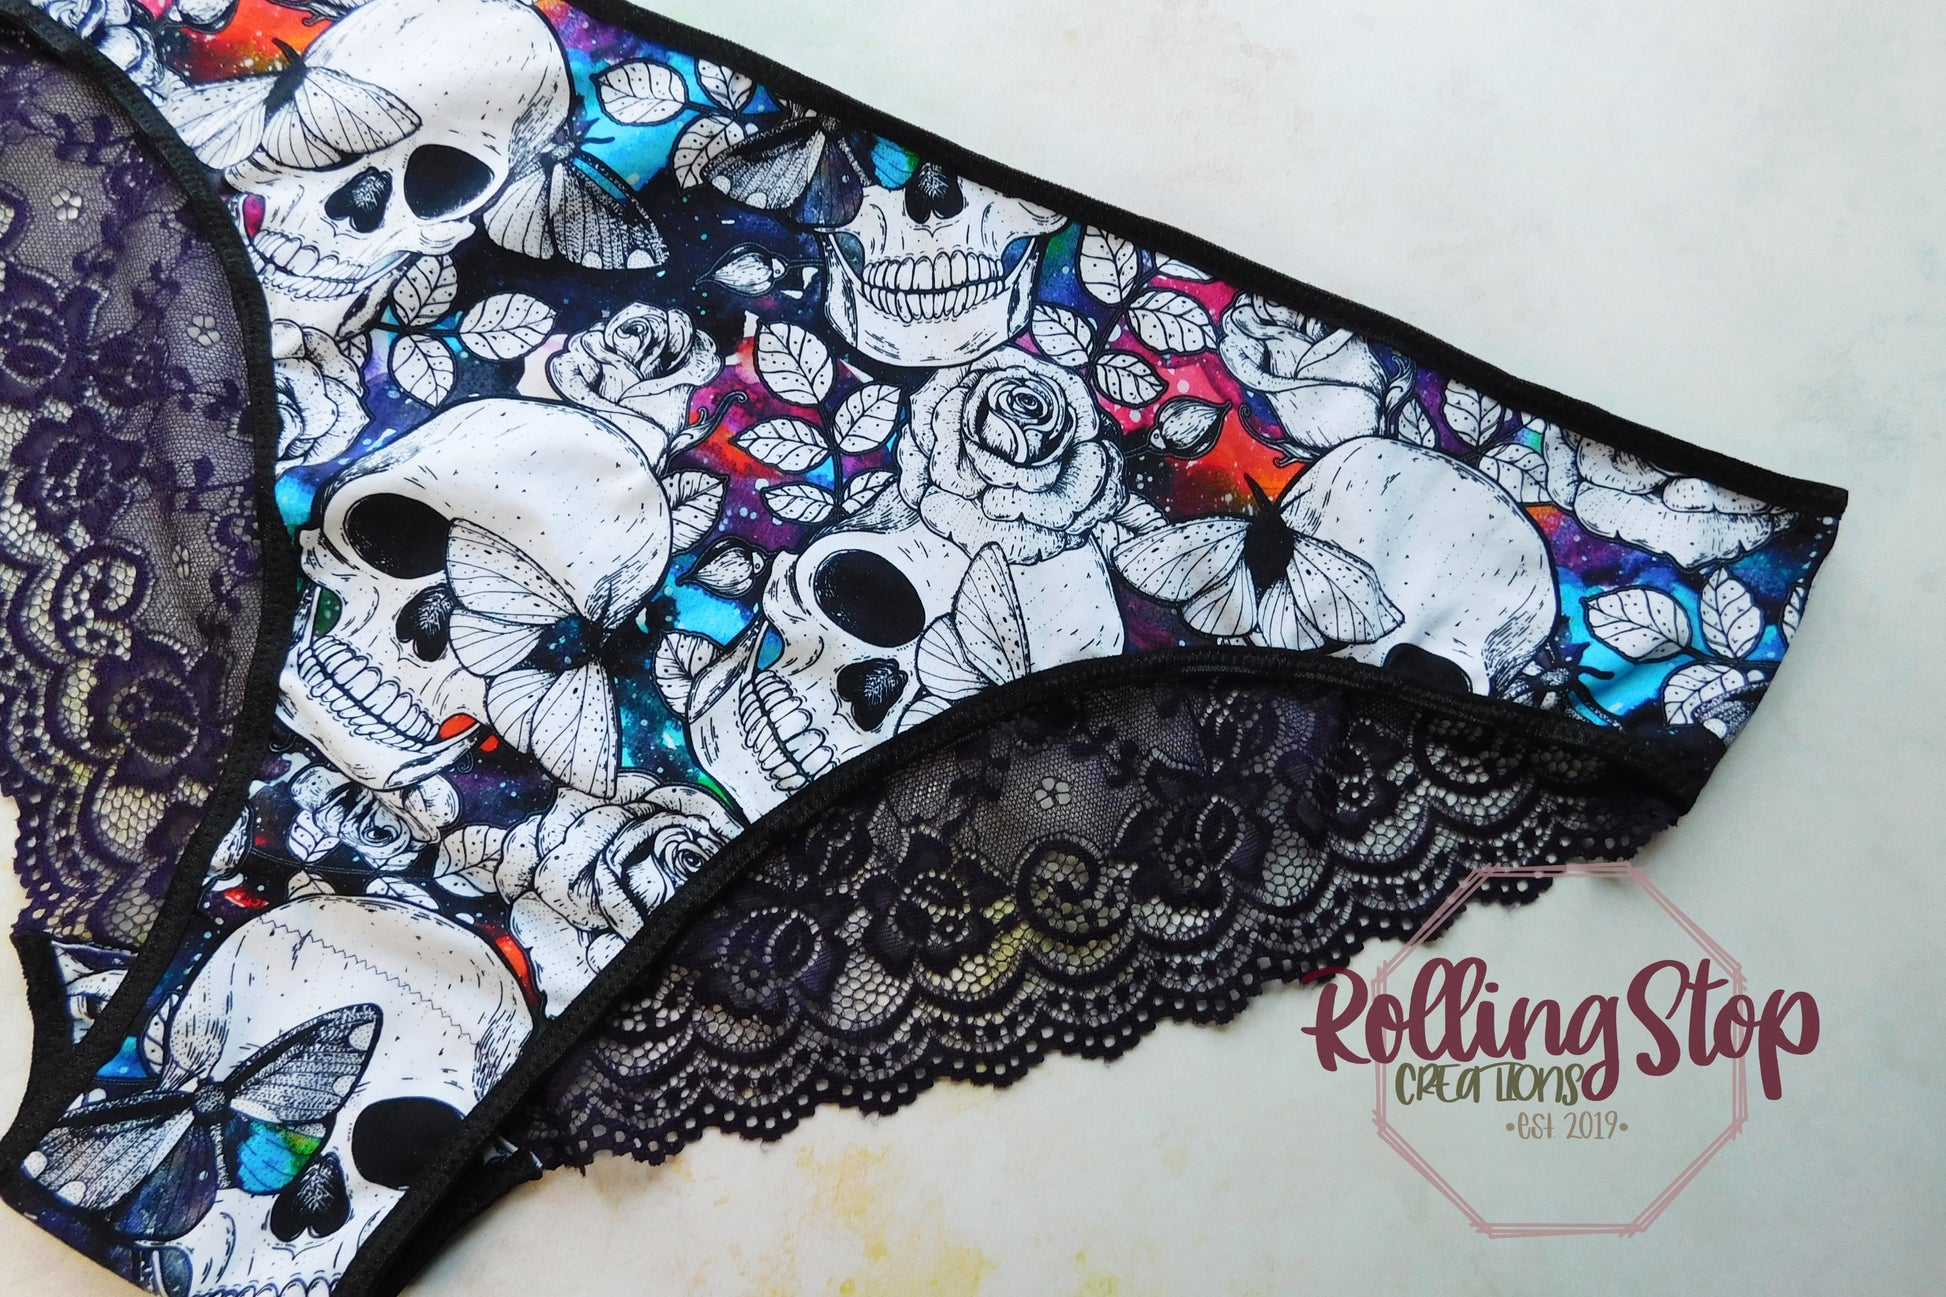 Bloody Mary Skulls & Moths Lace Accent Pantydrawls by Rolling Stop Creations sold by Rolling Stop Creations Jundies - L